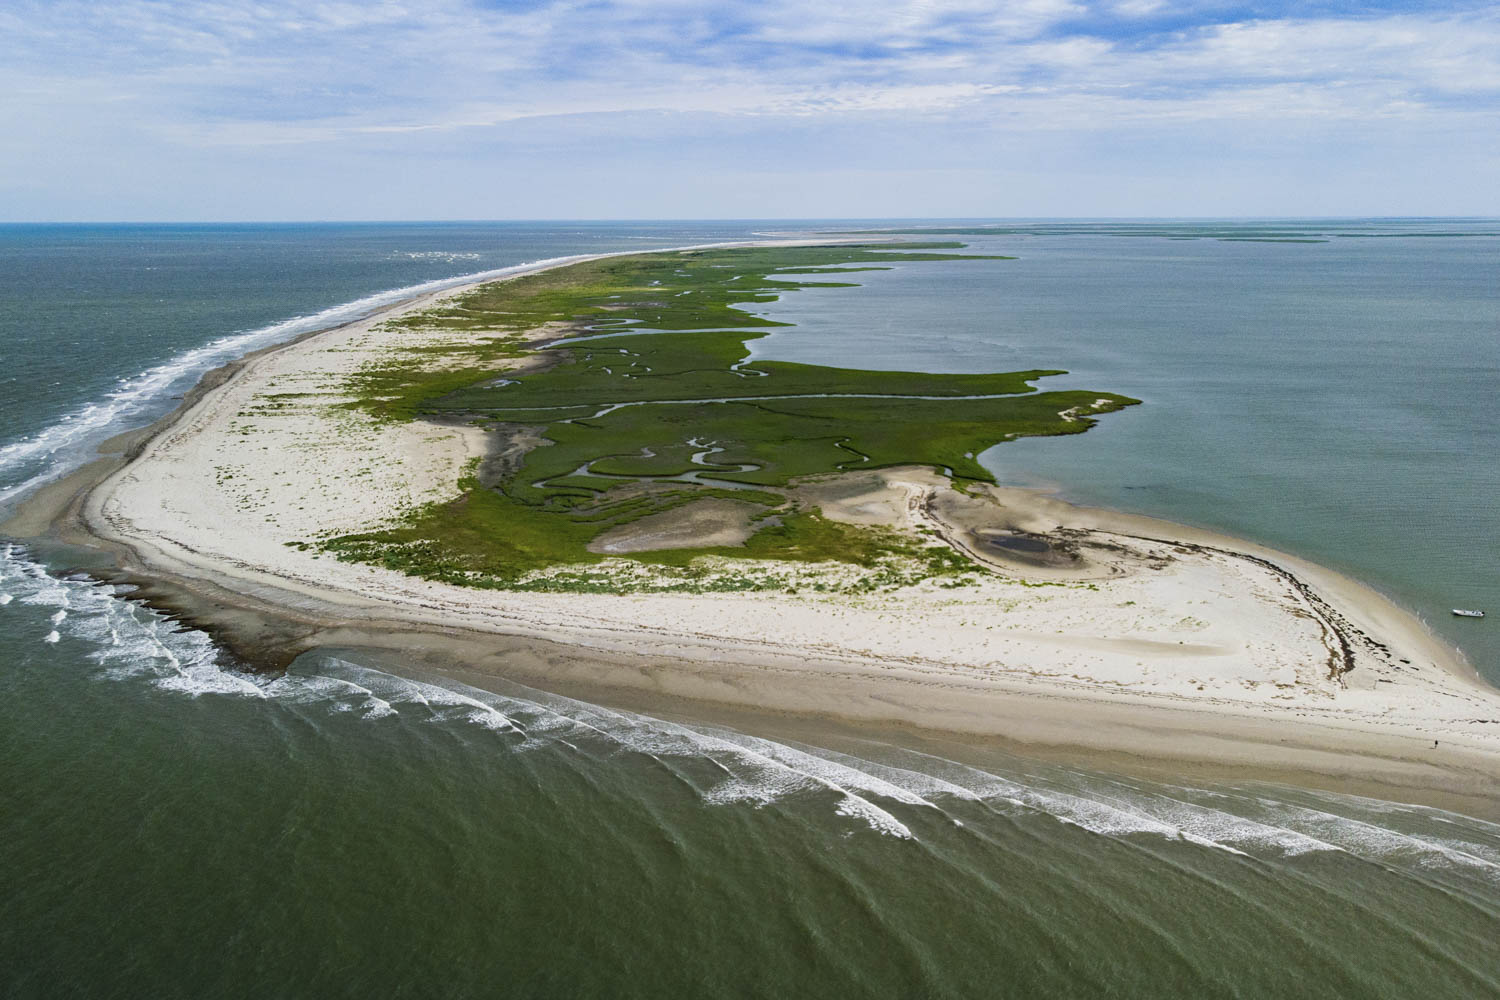 Green and sandy Barrier island surrounded by dark green water